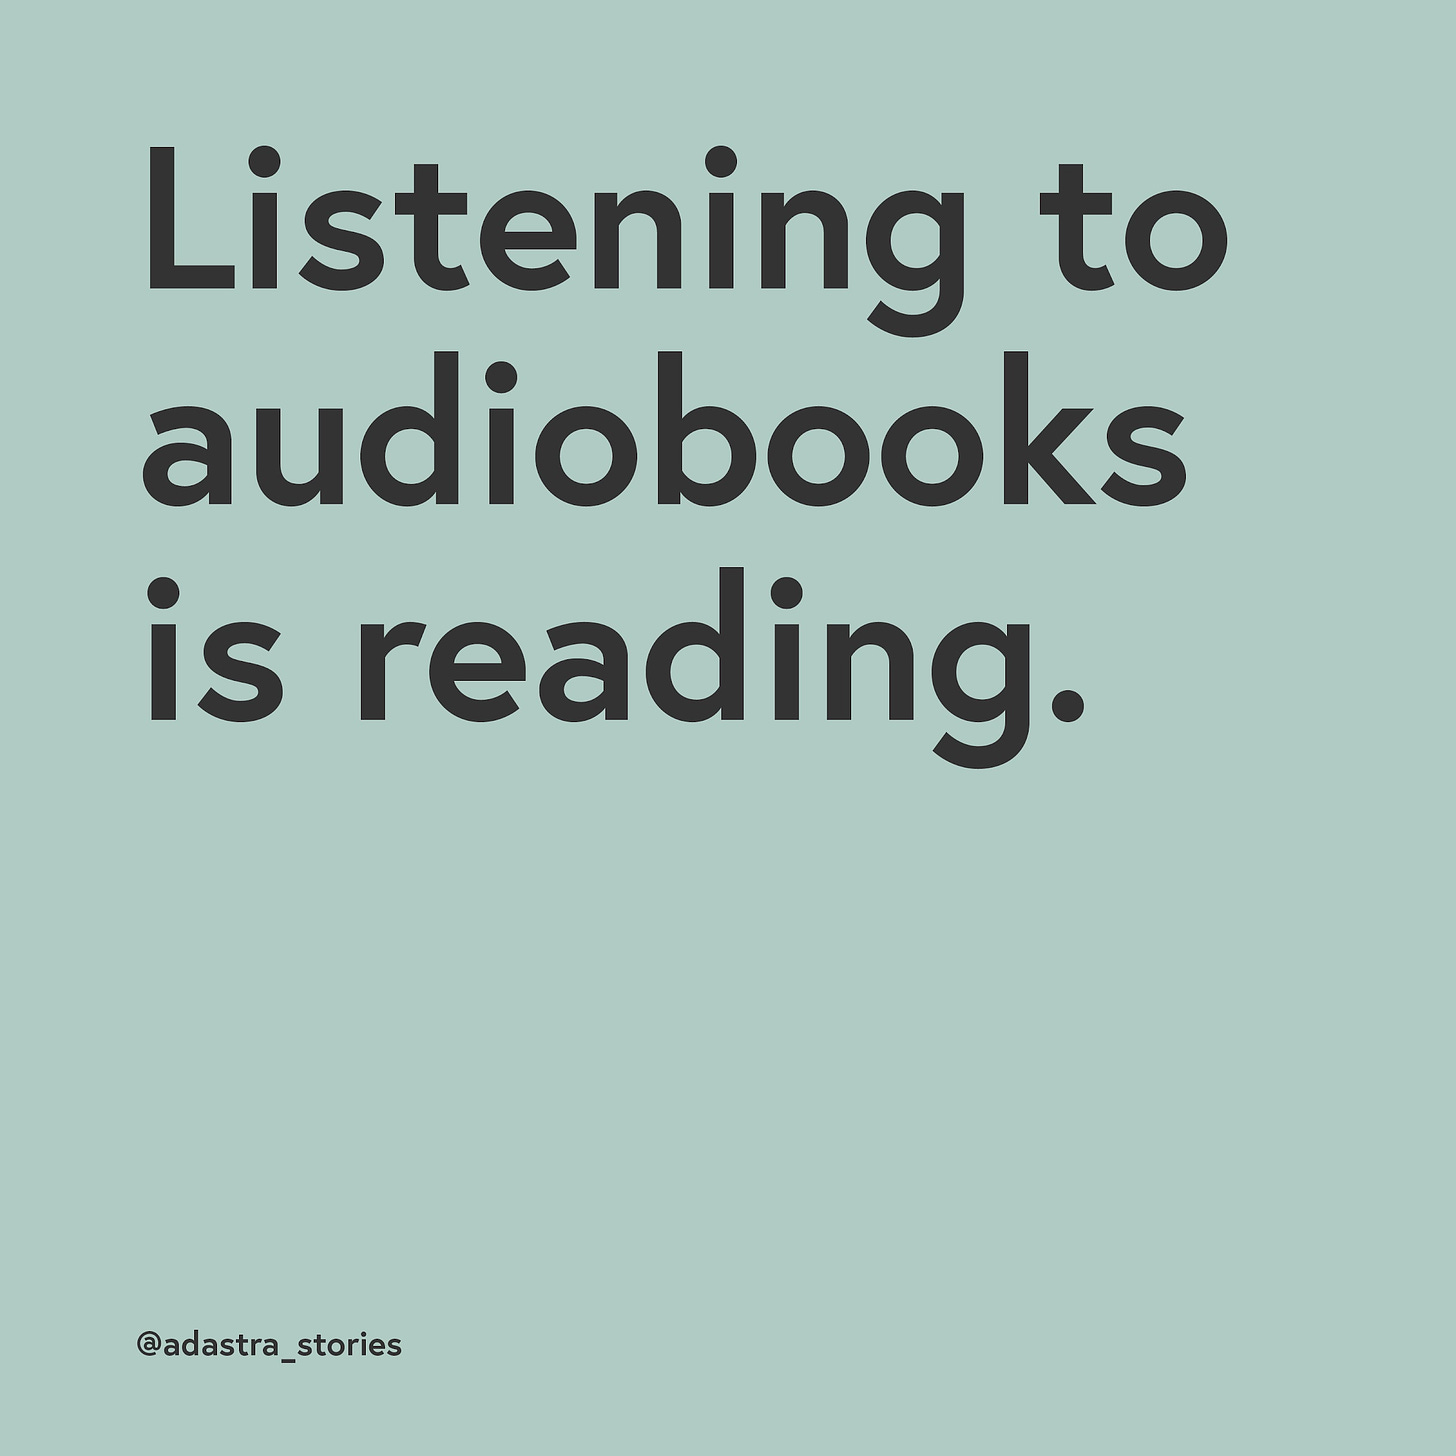 Listening to audiobooks is reading.